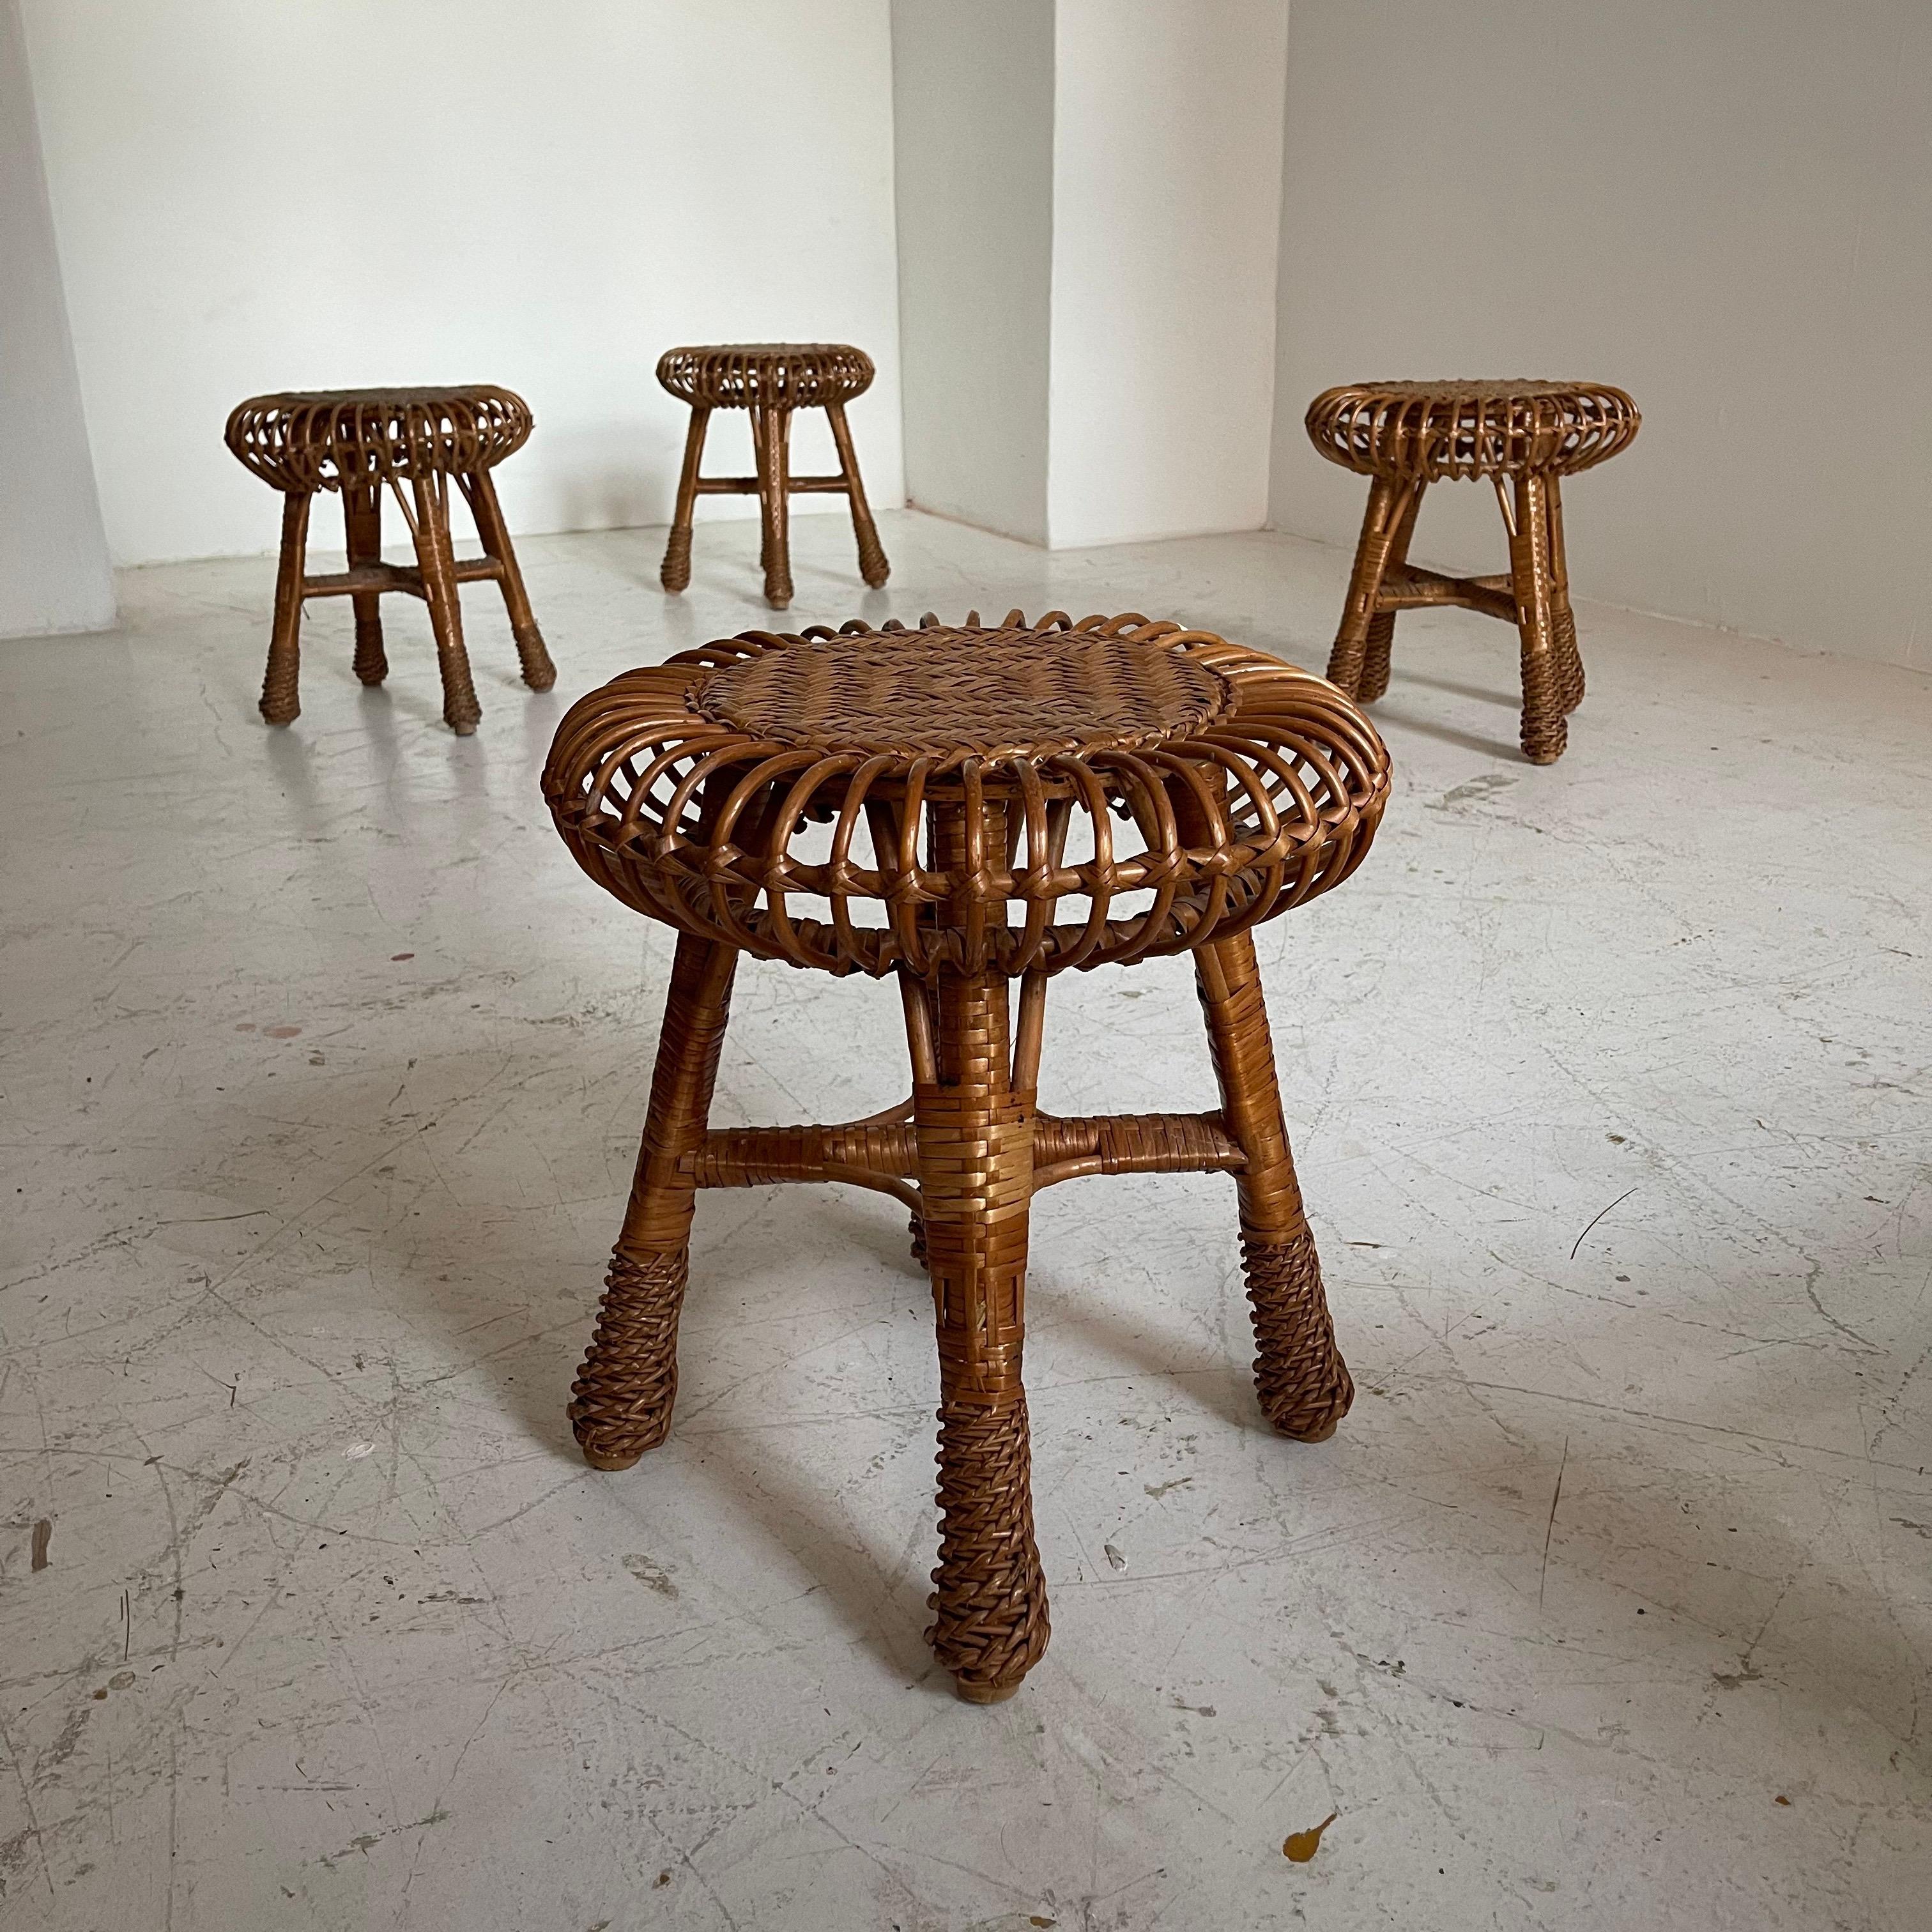 Franco Albini Rattan Bamboo Style Stools, Italy, 1959 For Sale 2